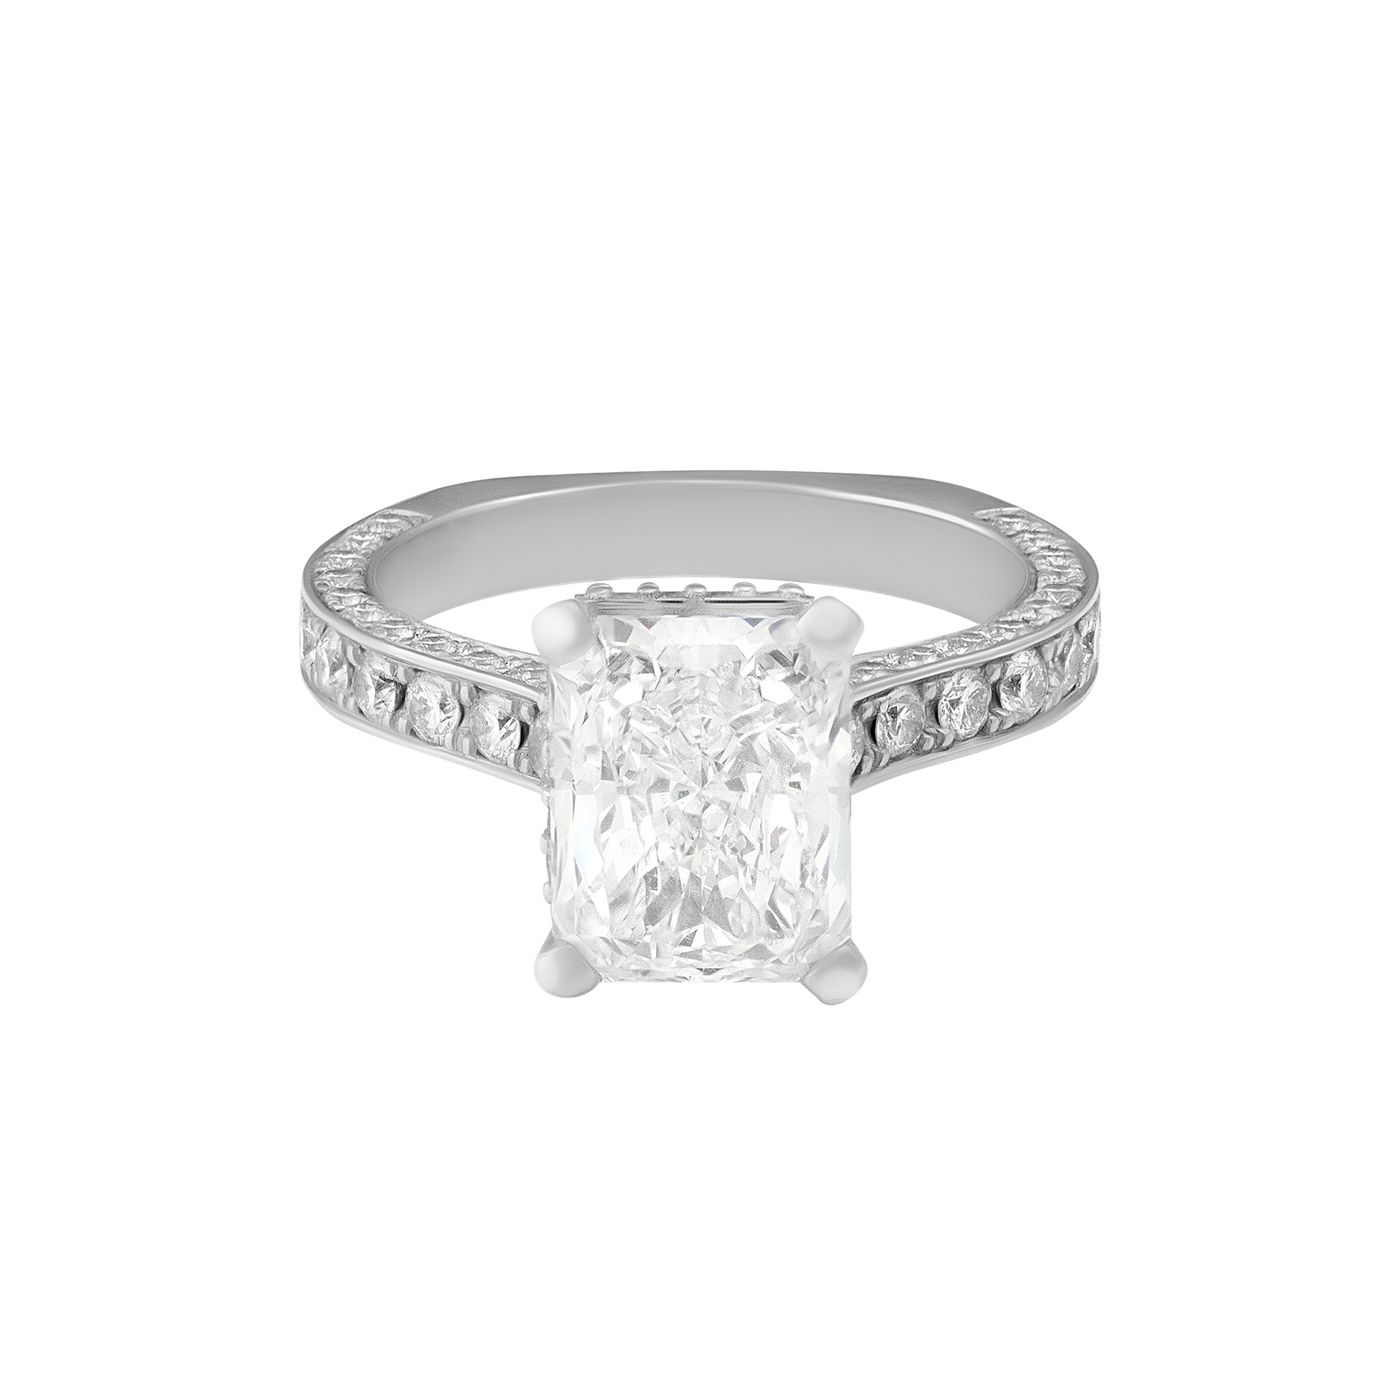 ECJ Collection 18K White Gold GIA Diamond Pave Engagement Ring 3.01ct.